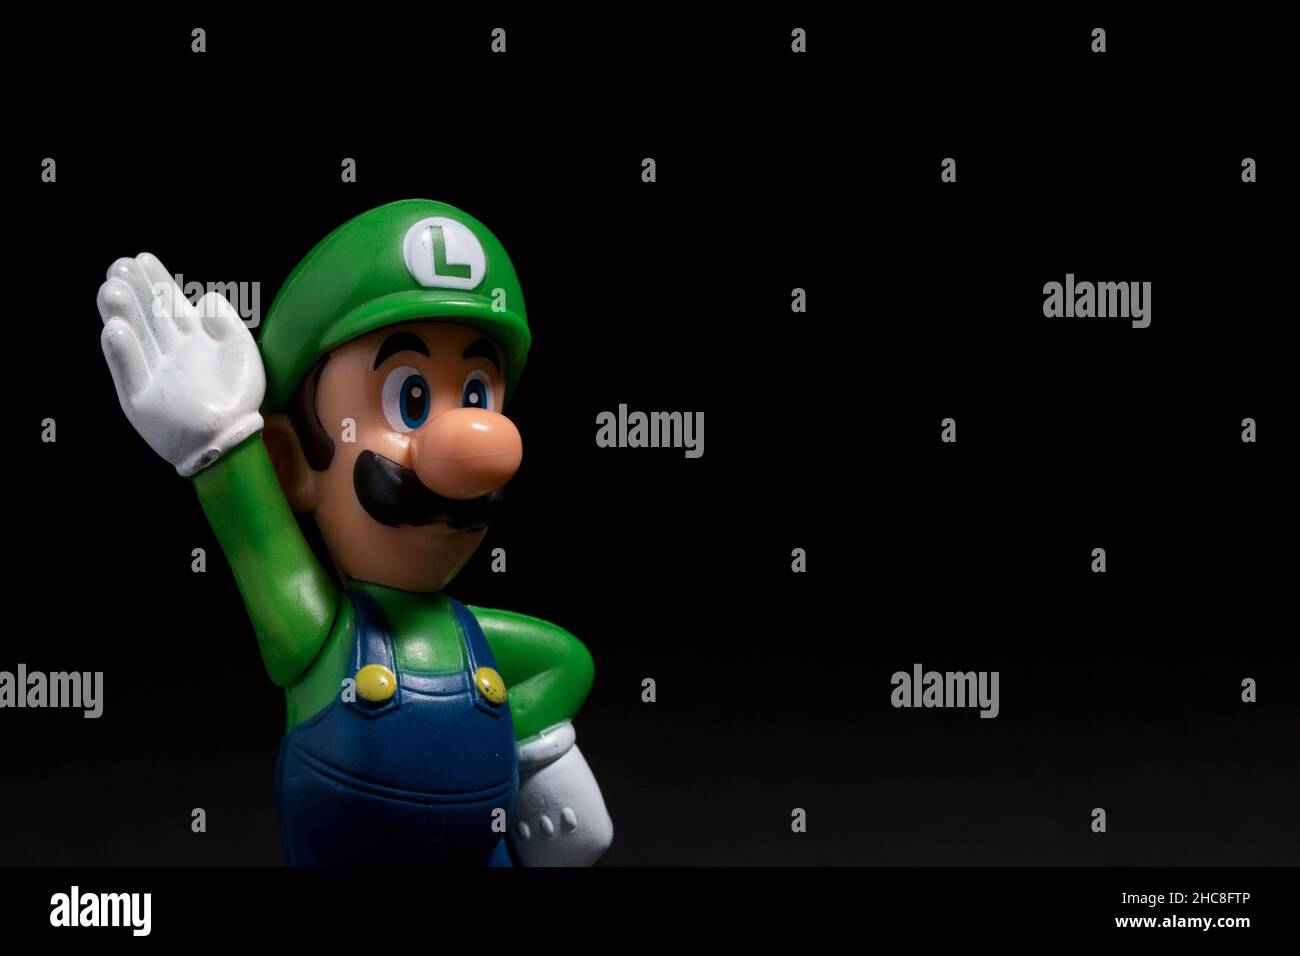 Moscow, Russia - December 27, 2021: Plastic figure of Luigi from Nintendo video game isolated on black background. Stock Photo